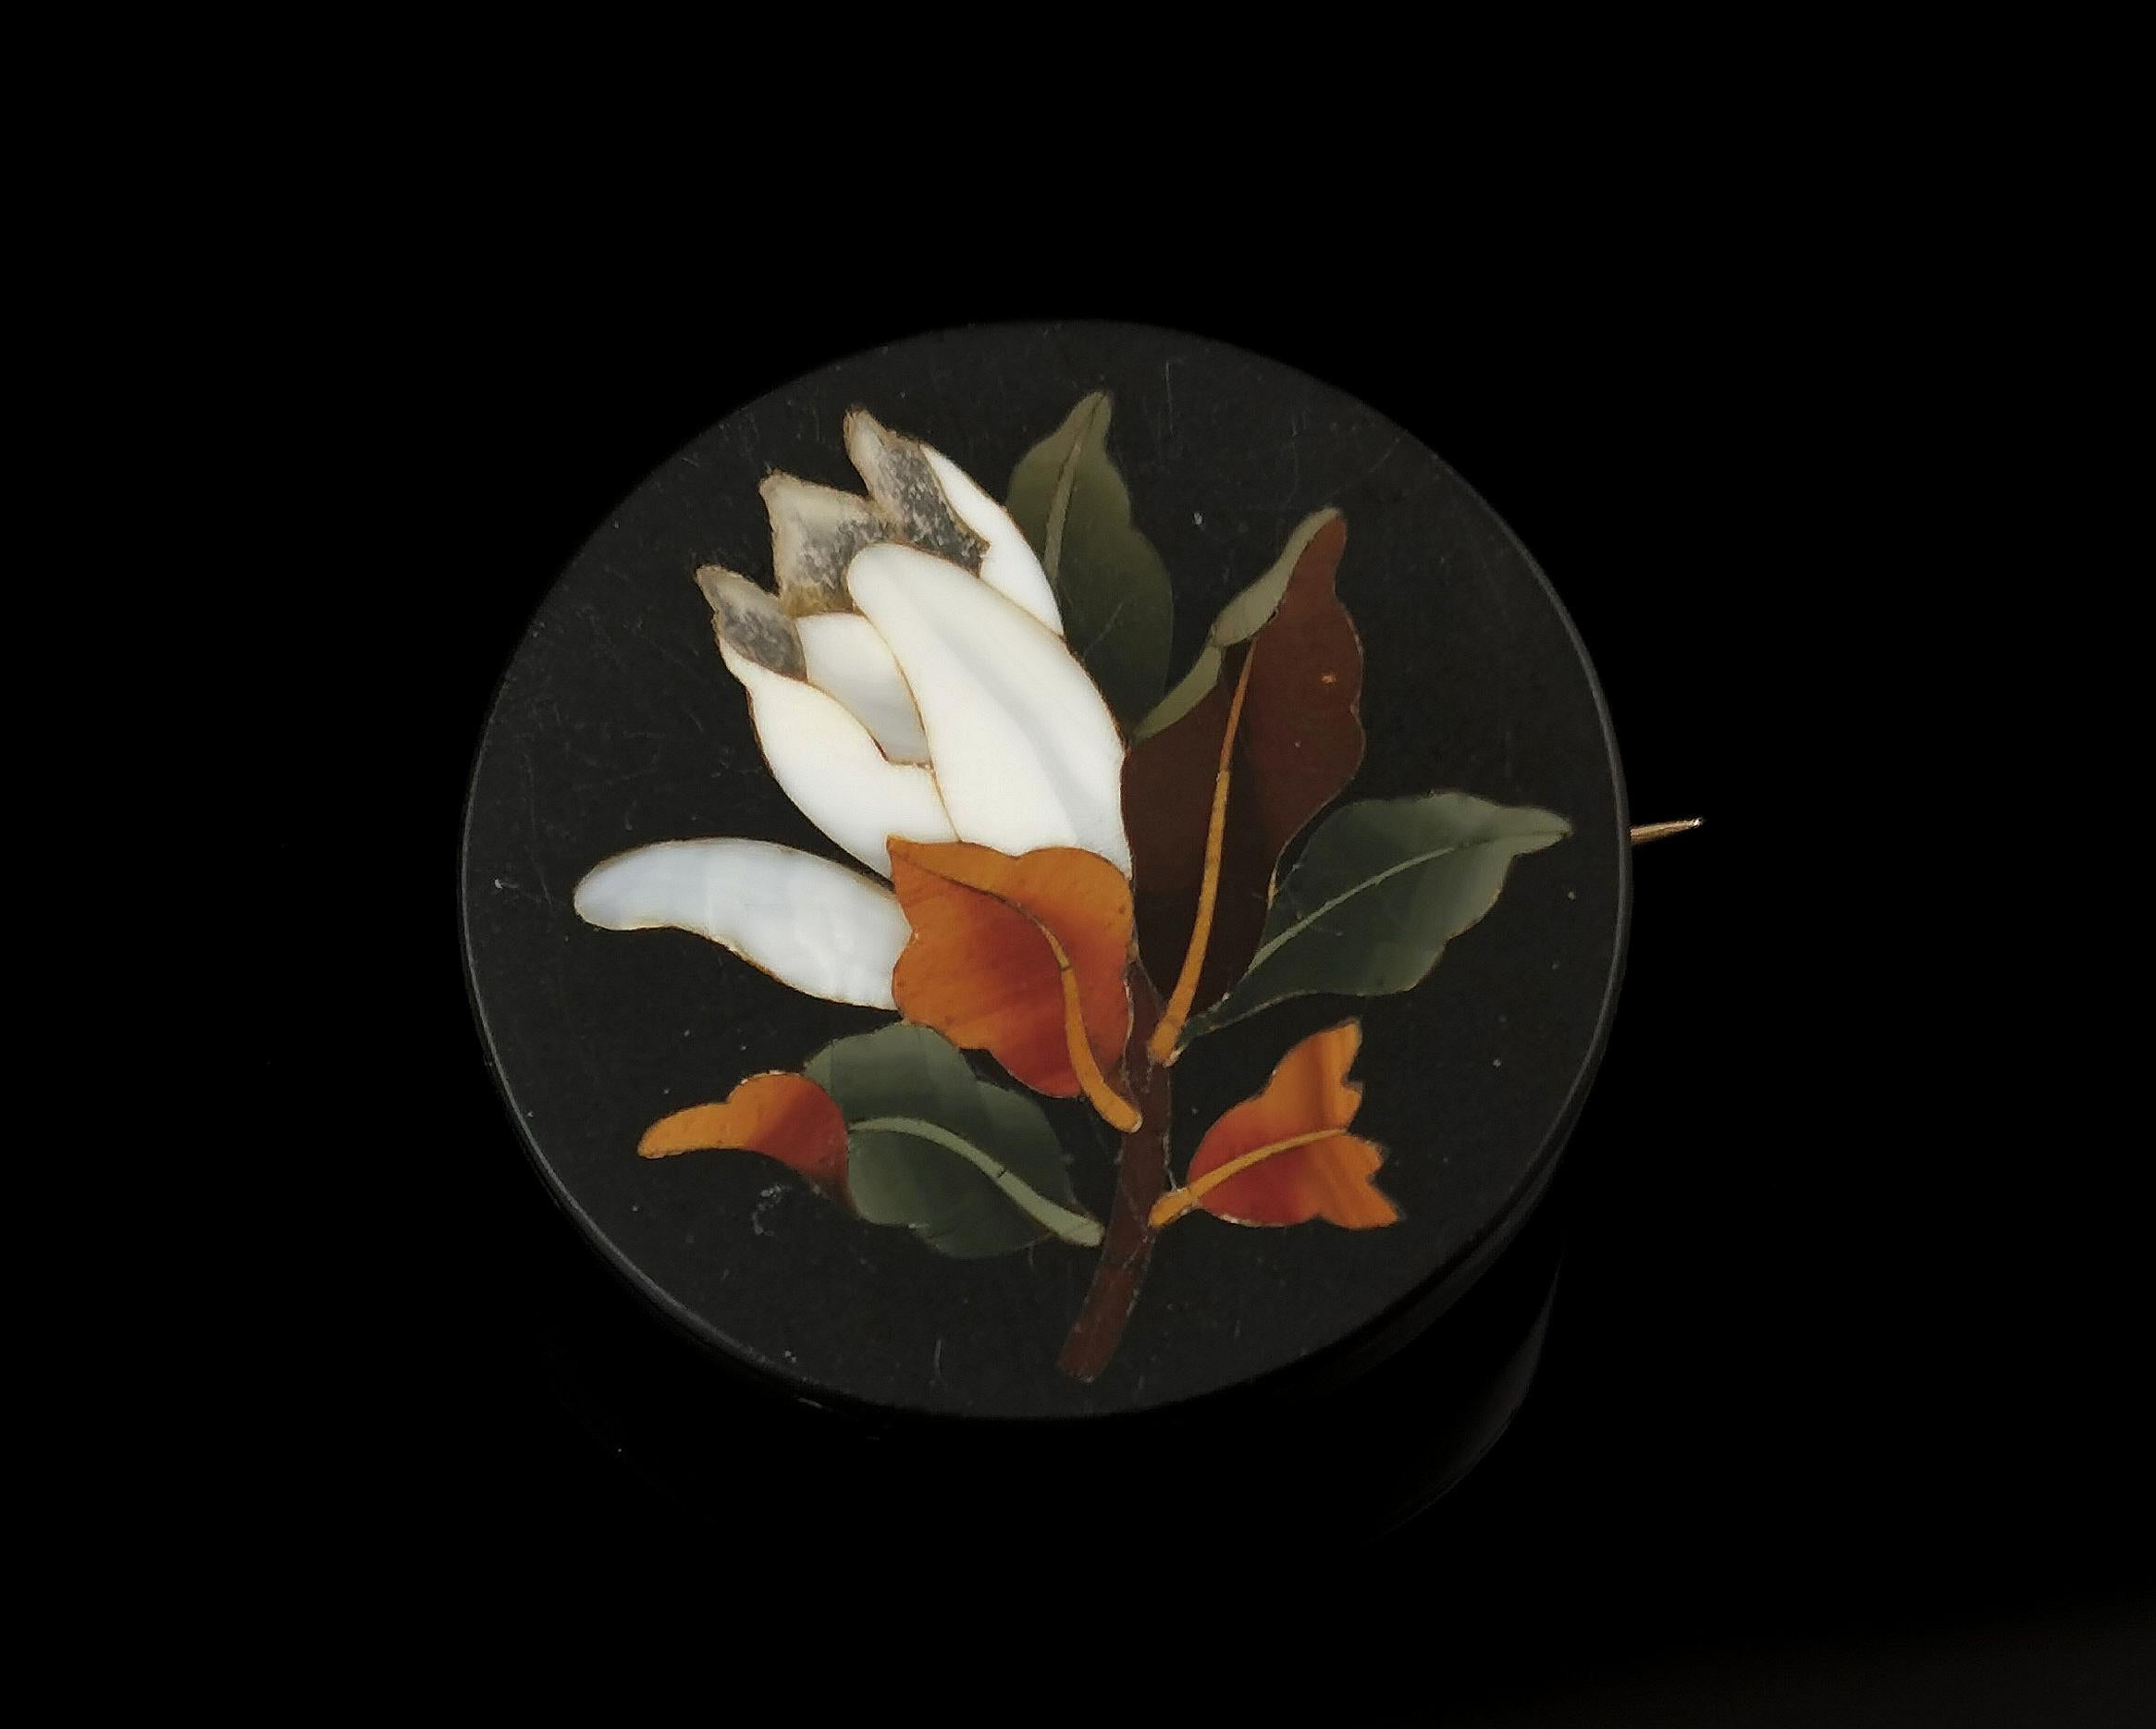 A beautiful antique Pietra Dura flower brooch.

Circular shaped it has a dark slate black ground with hardstone inlay of browns, orange, white and green.

The image depicts a flower and it has a lovely natural colourway.

The brooch has a gilt brass